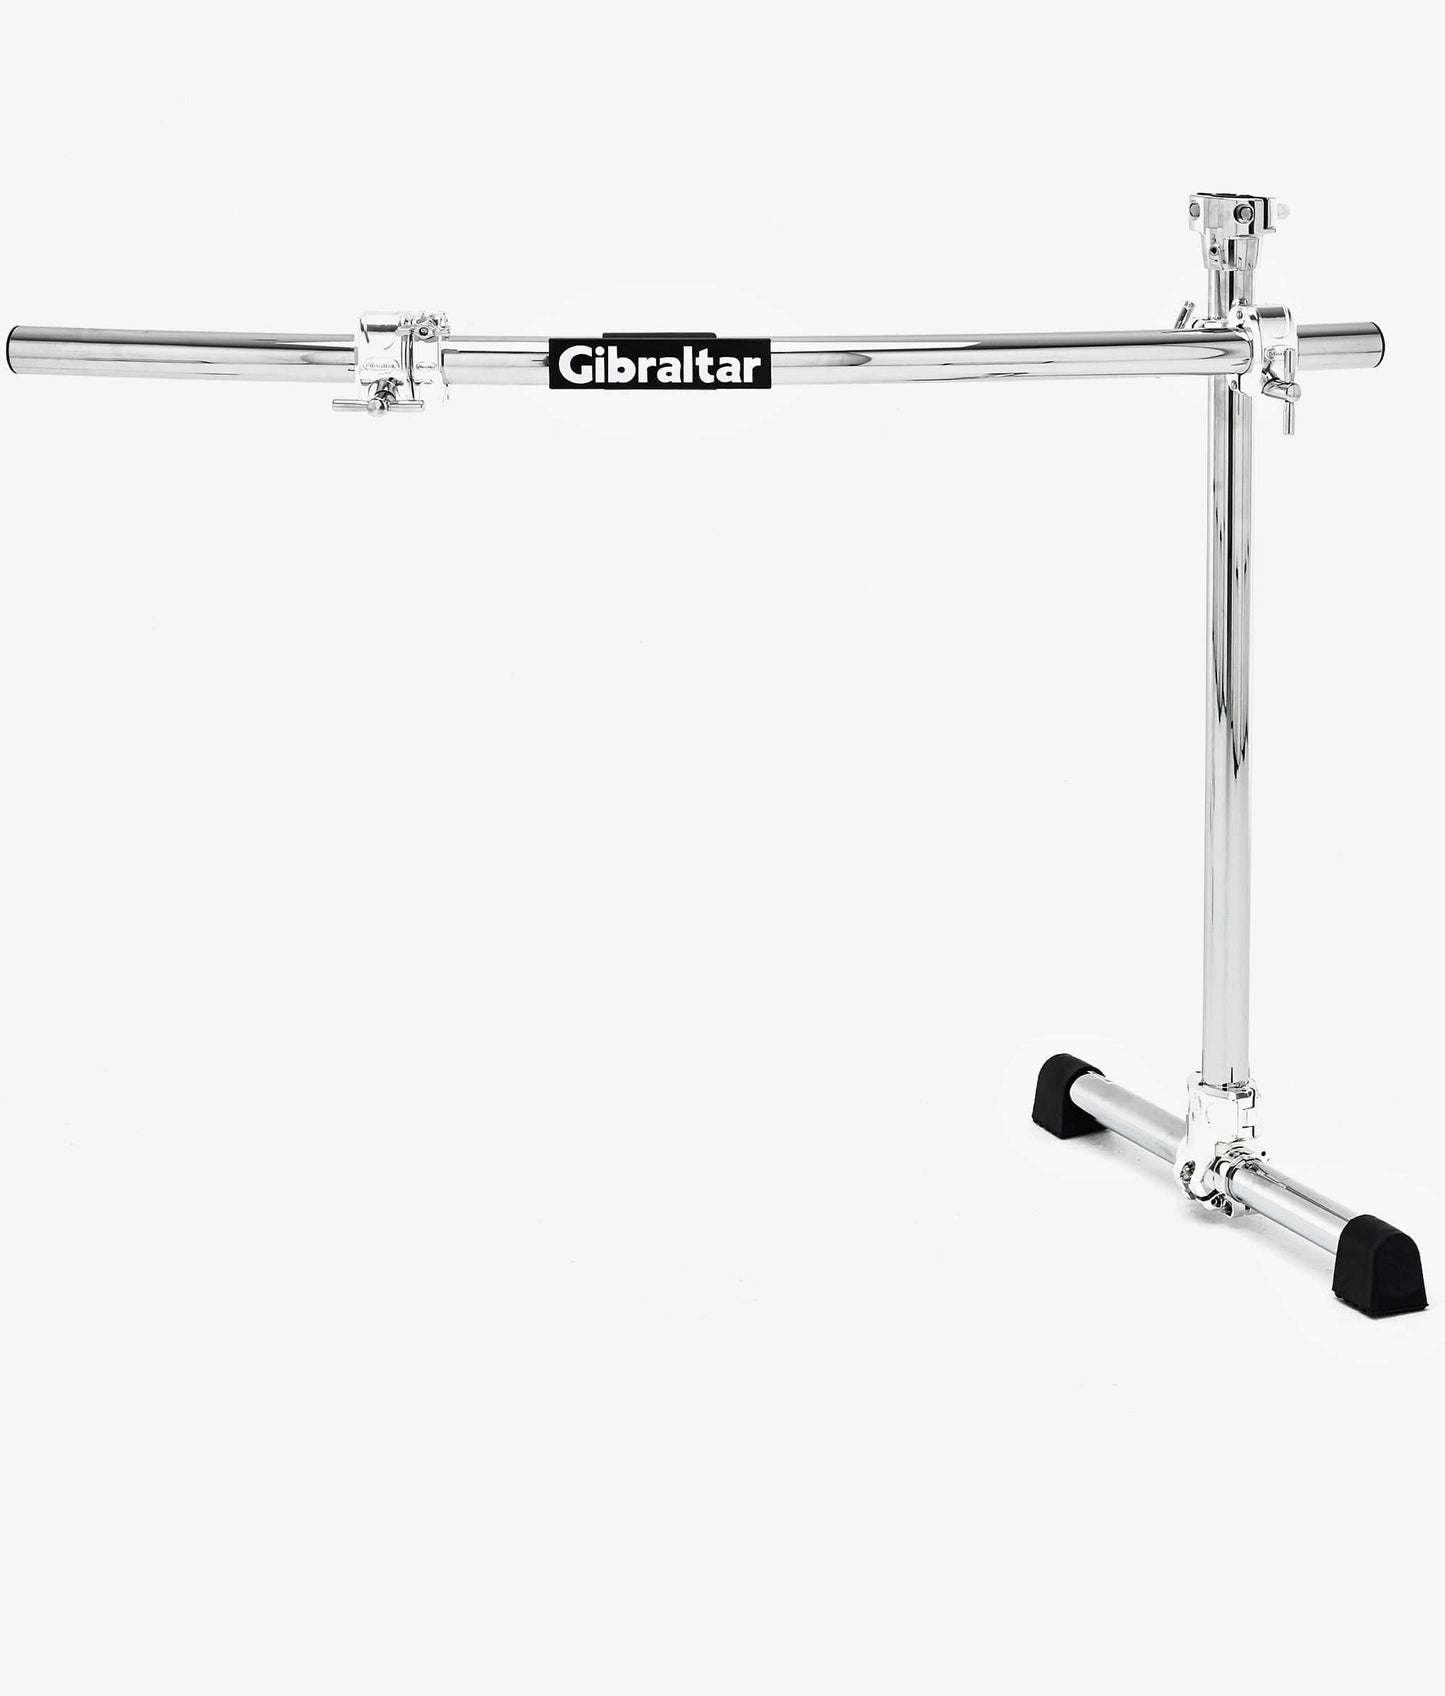  Gibraltar GCS150C Drum Rack Extension Pack with Chrome Clamps drum rack pack